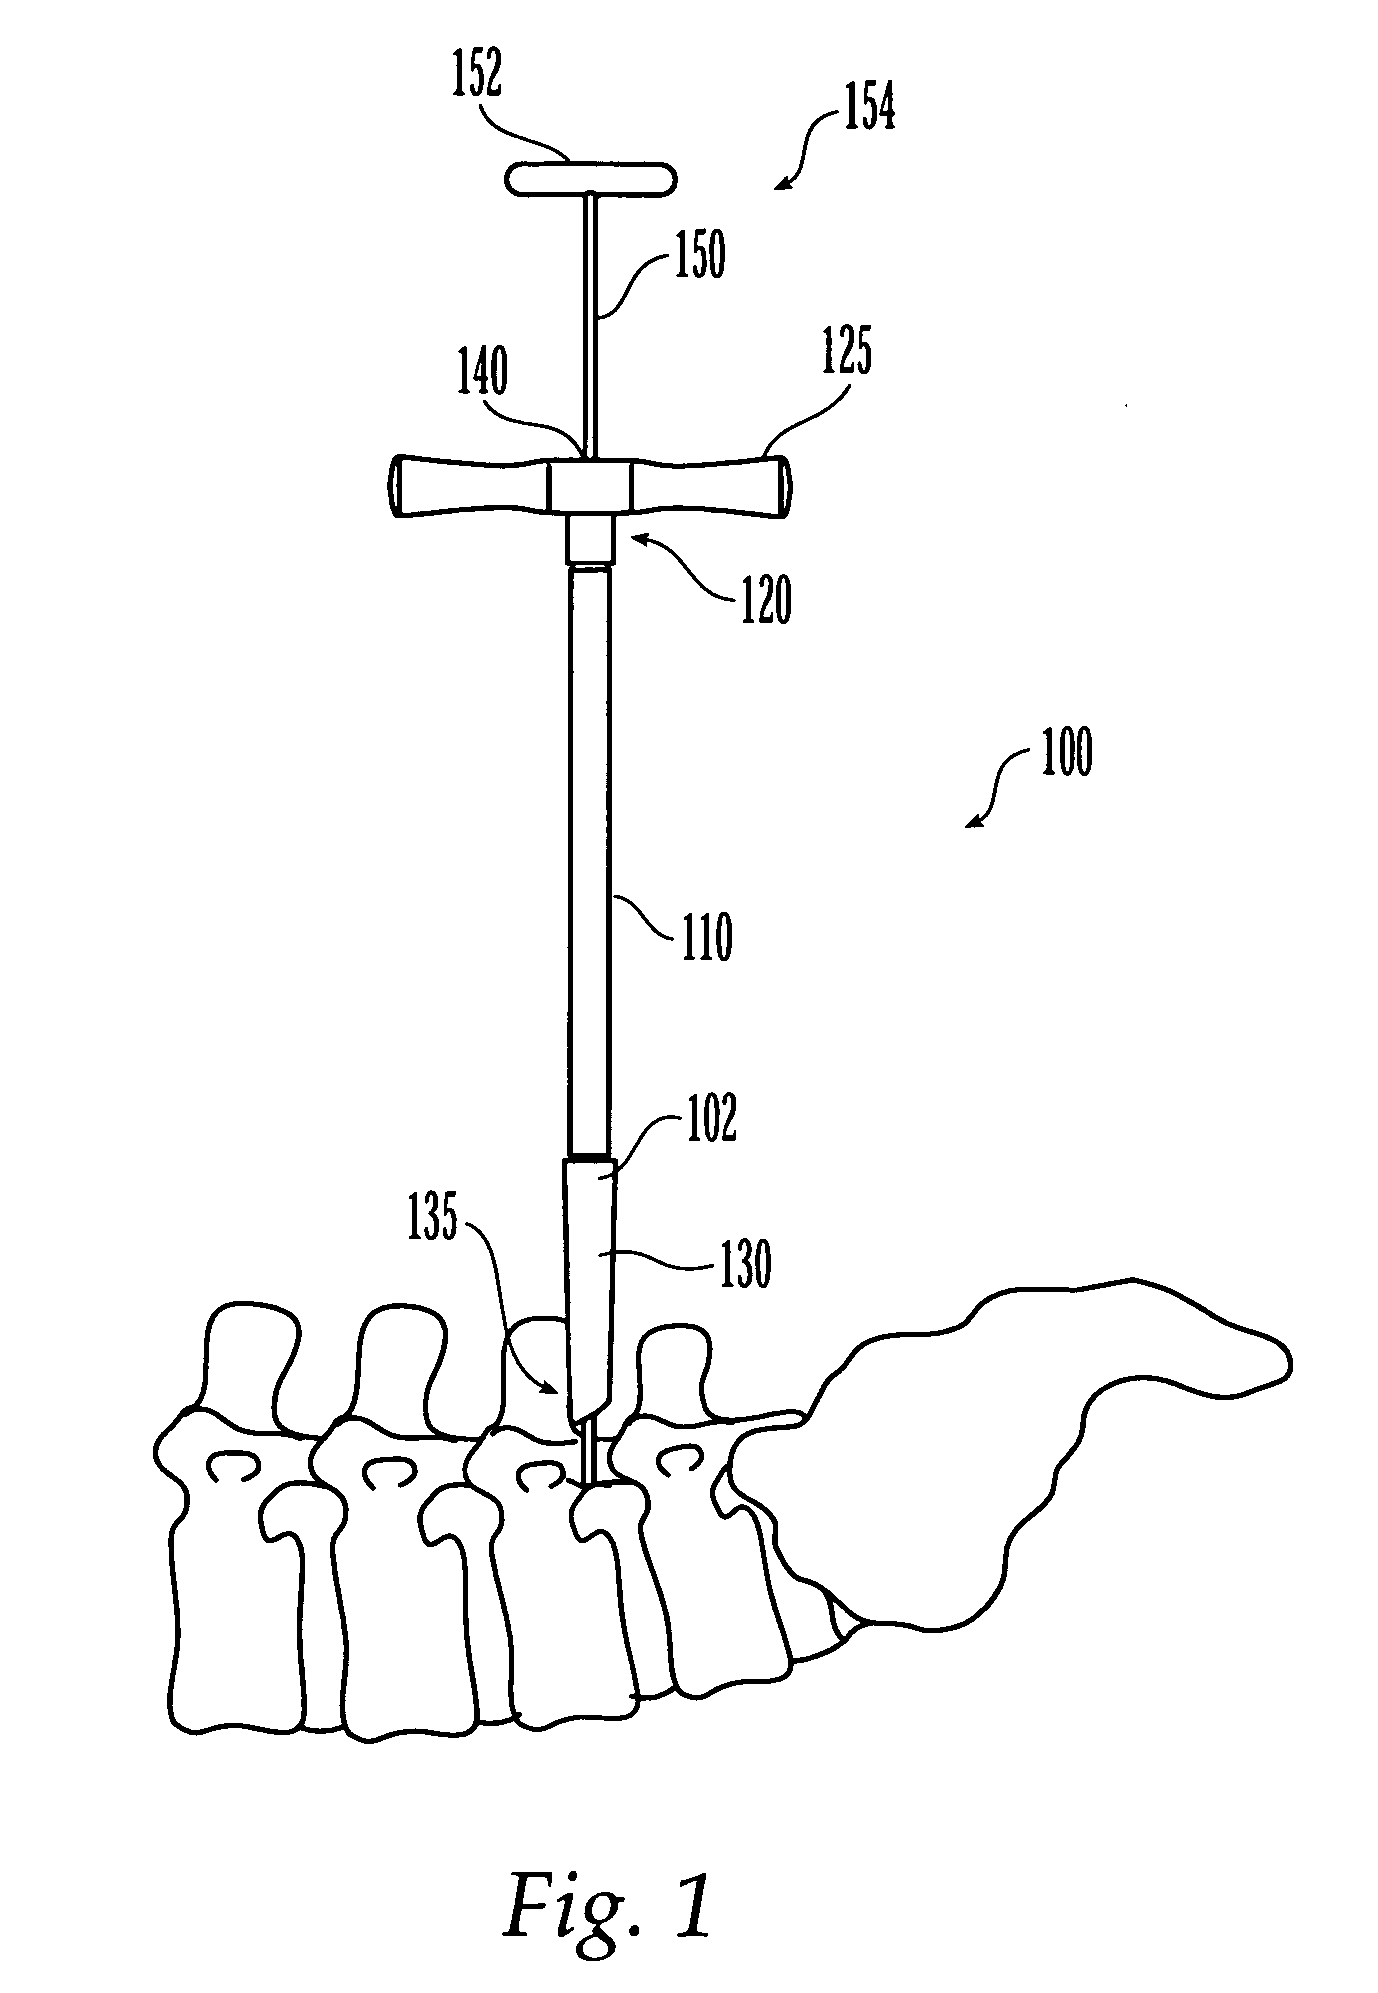 Less invasive surgical system and methods